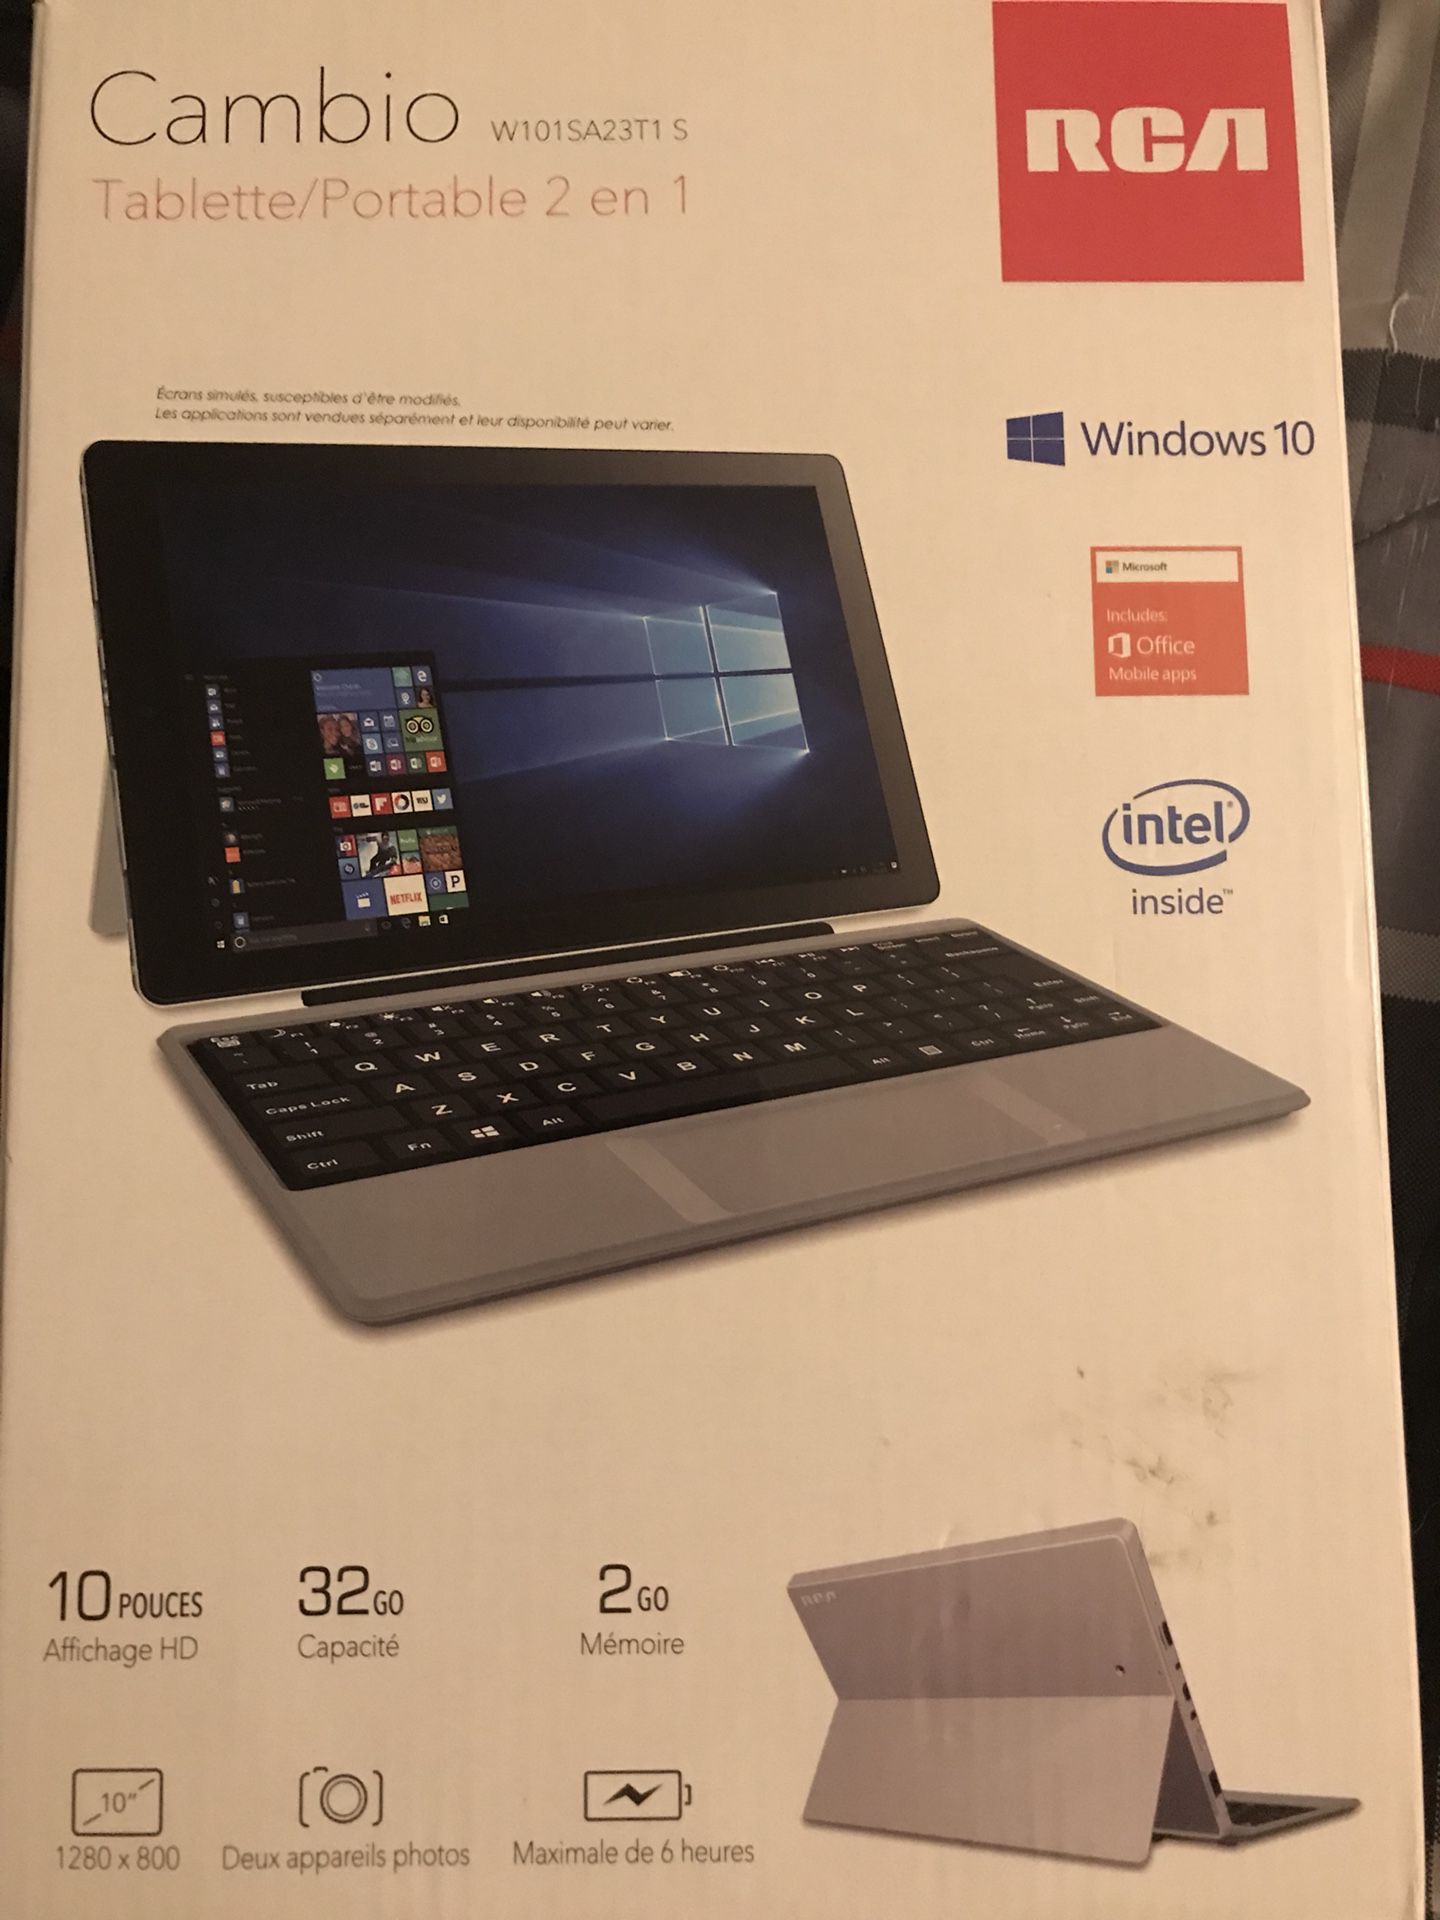 2-in-1 Notebook/Tablet